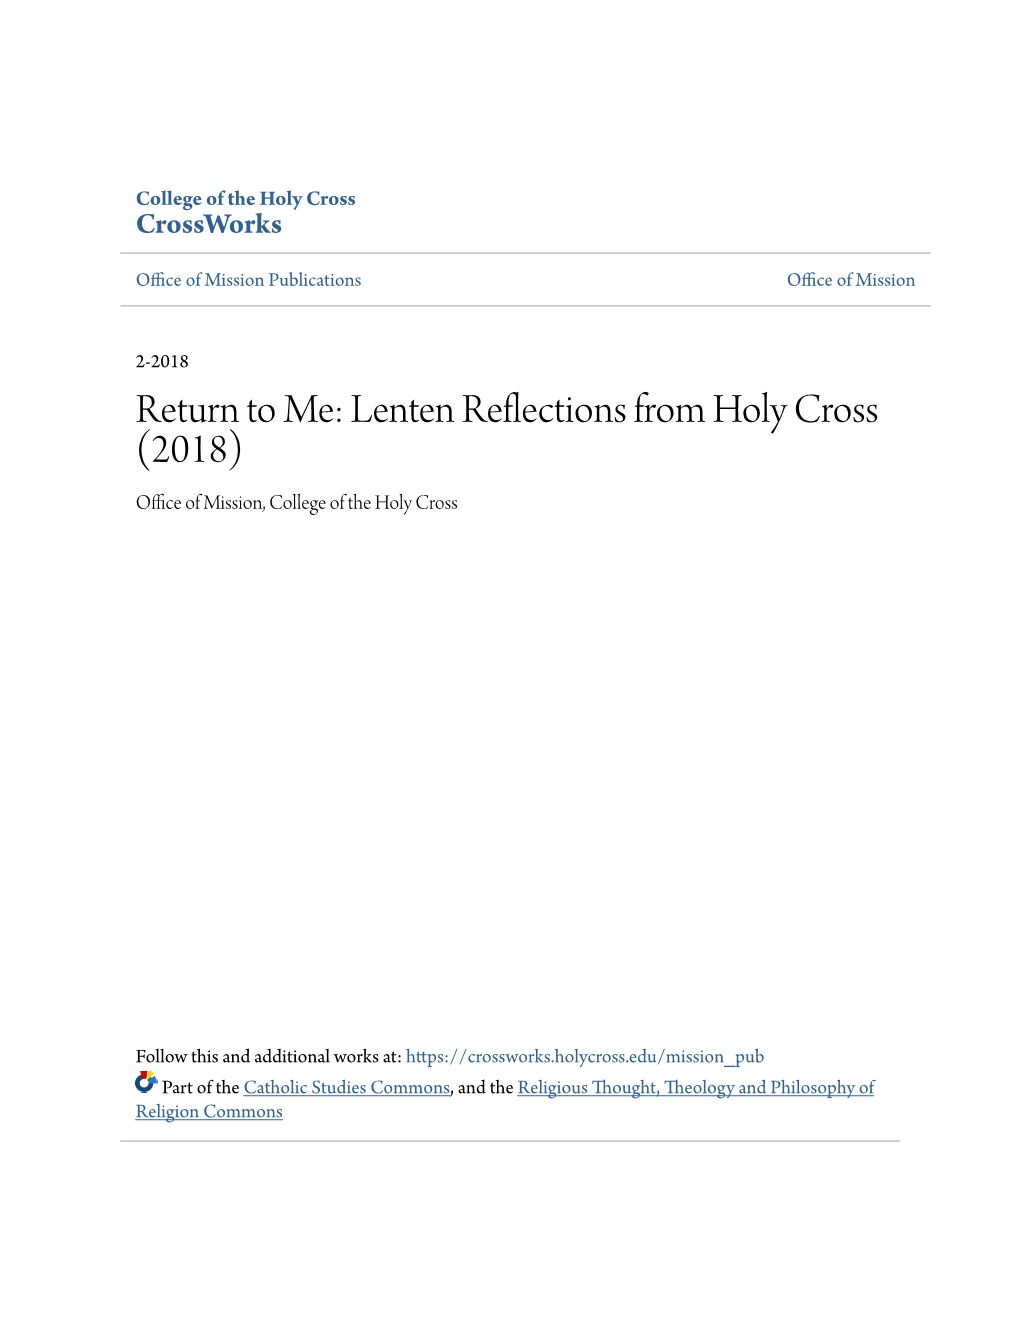 Lenten Reflections from Holy Cross (2018) Office Ofi M Ssion, College of the Holy Cross